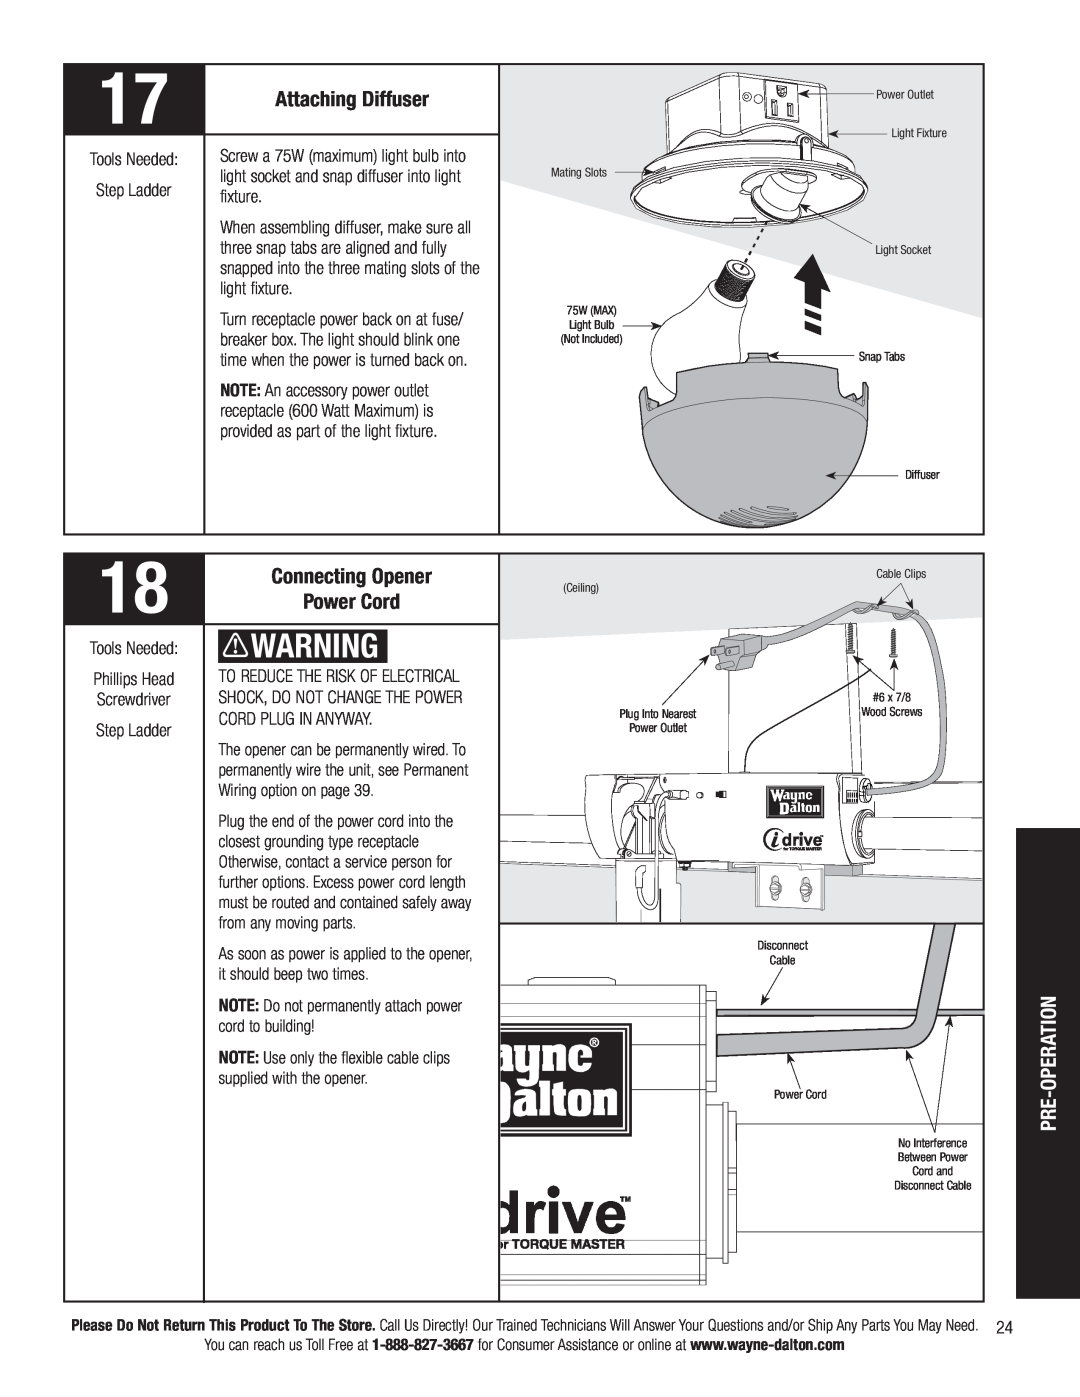 Wayne-Dalton 3663-372 installation instructions Attaching Diffuser, Connecting Opener, Power Cord, Pre-Operation 